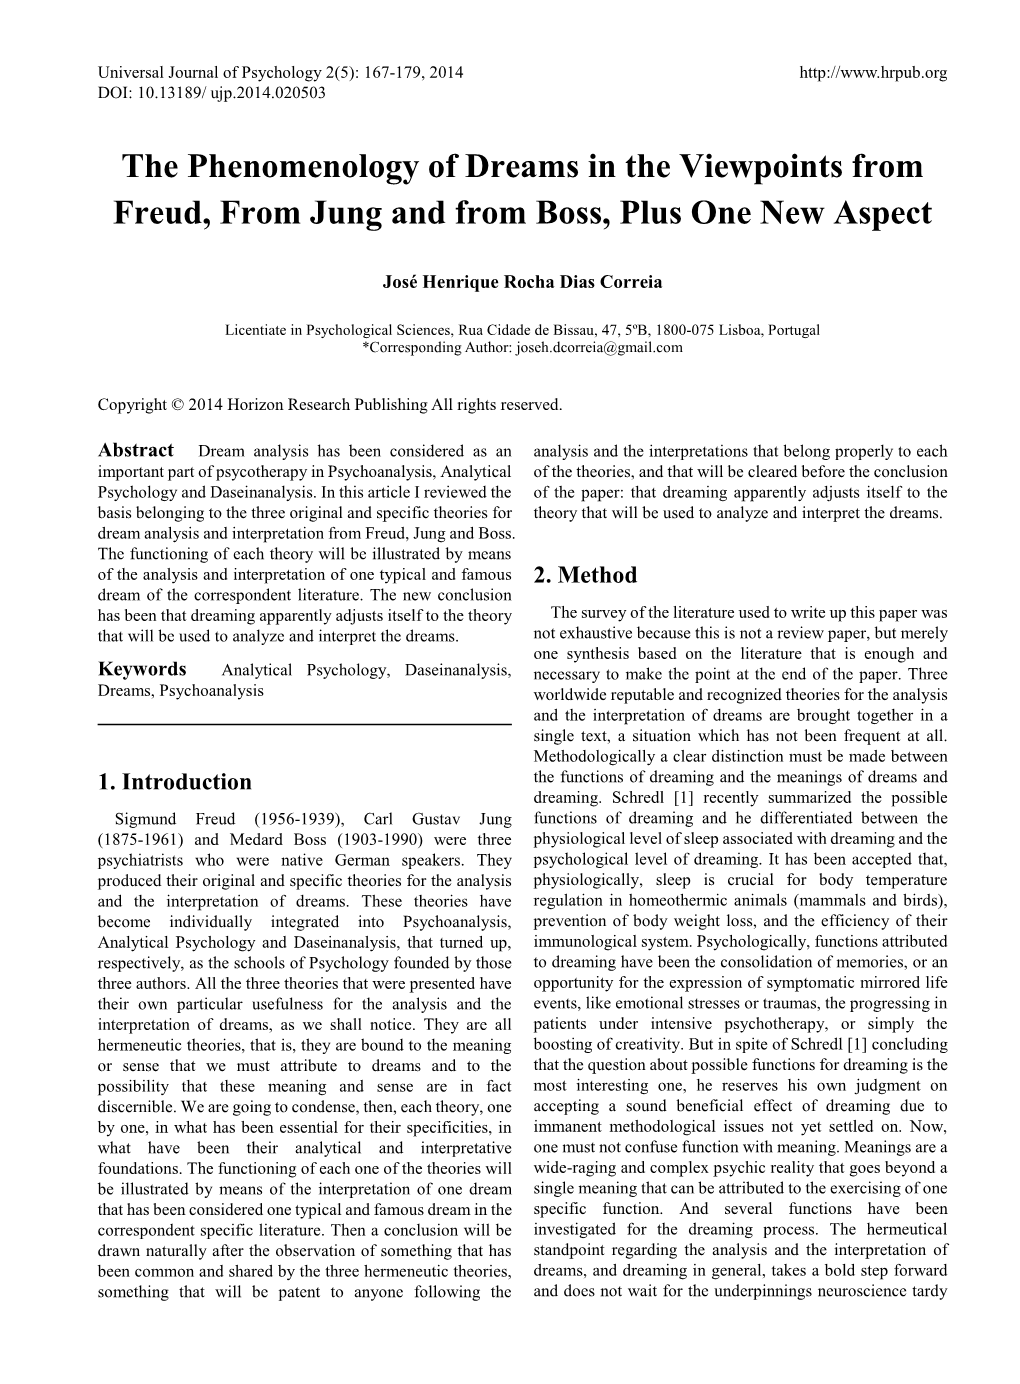 The Phenomenology of Dreams in the Viewpoints from Freud, from Jung and from Boss, Plus One New Aspect